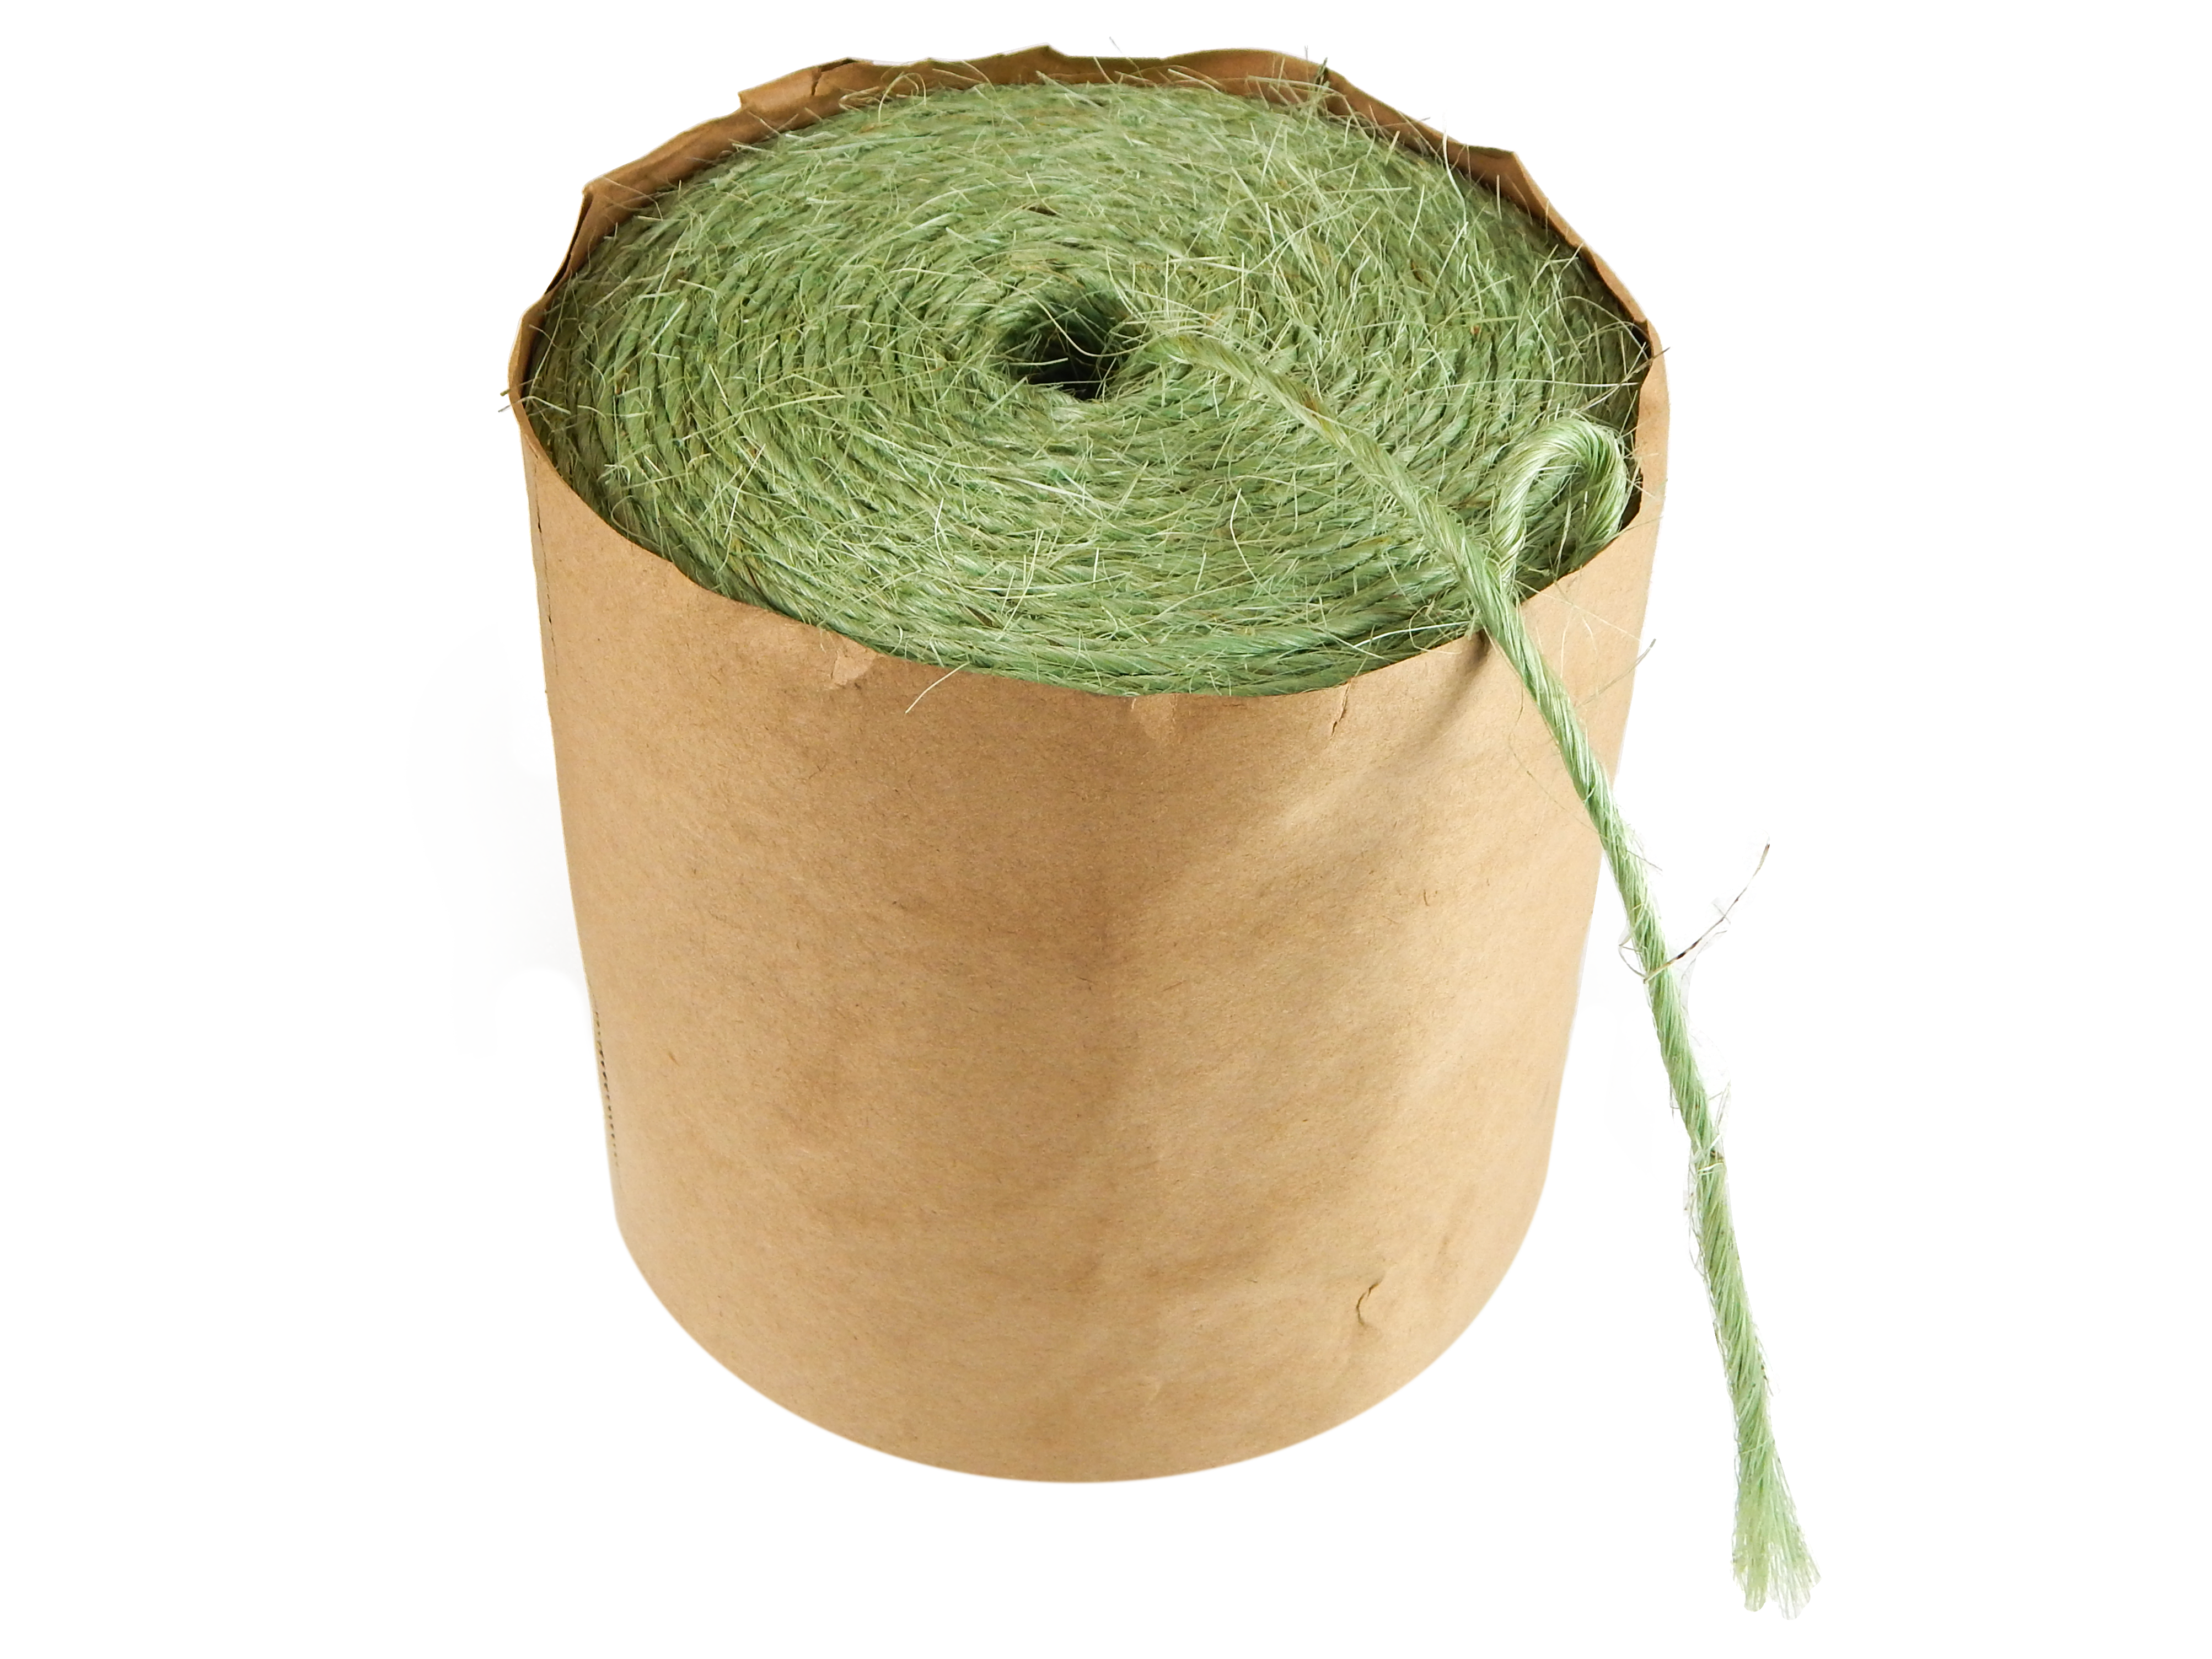 Twine--Synthetic or Natural? - Tractor Tools Direct